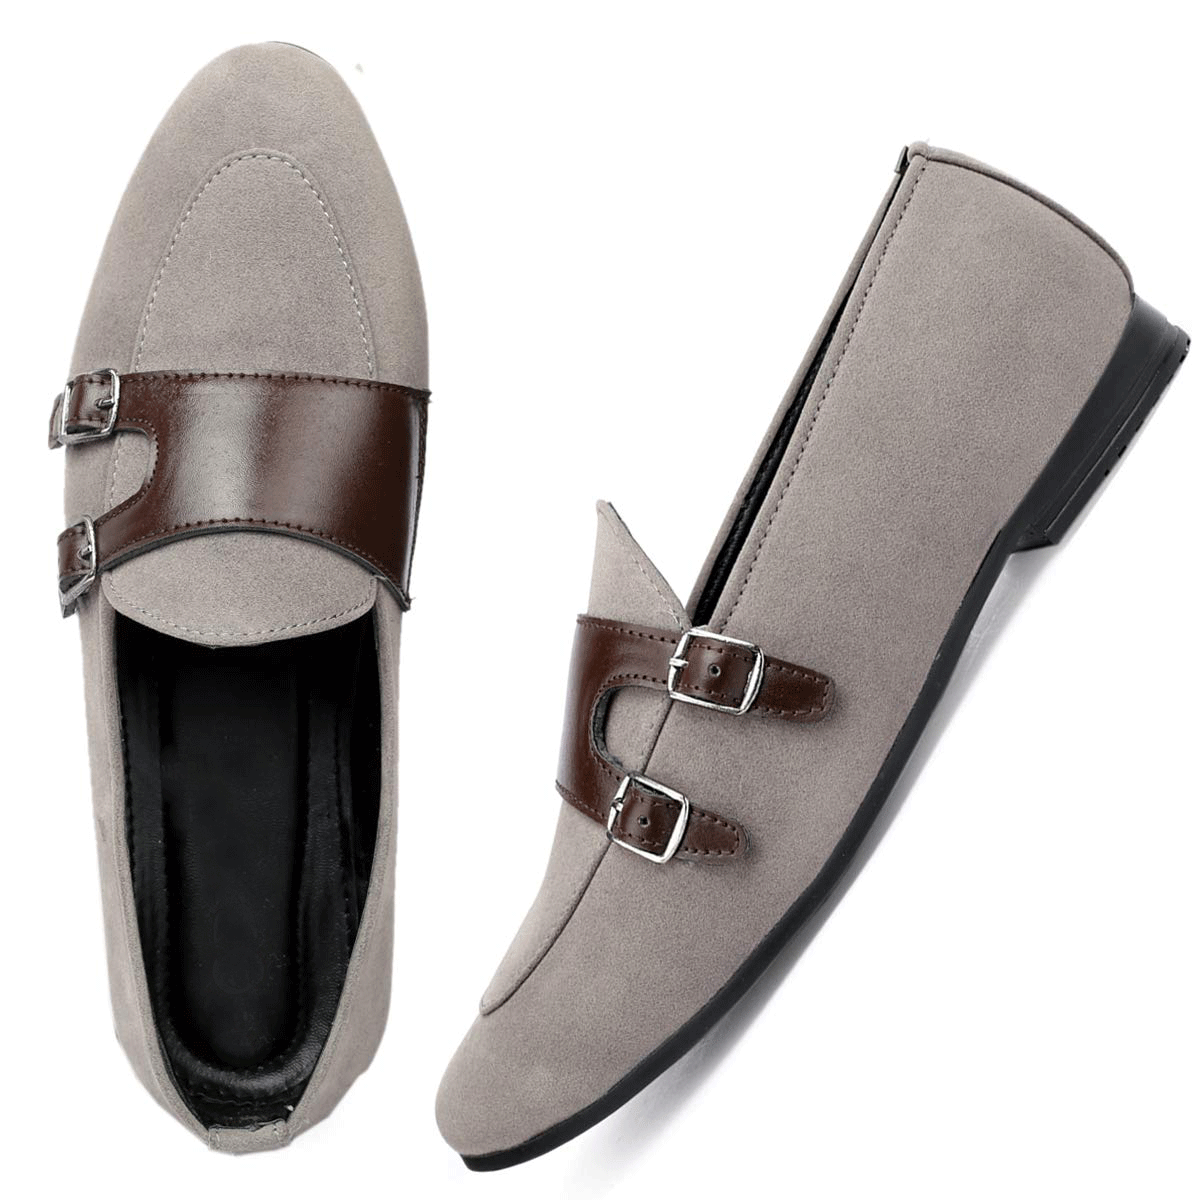 Fashionable Double Monk Suede Material Slip On Shoes For Men's-Unique and Classy